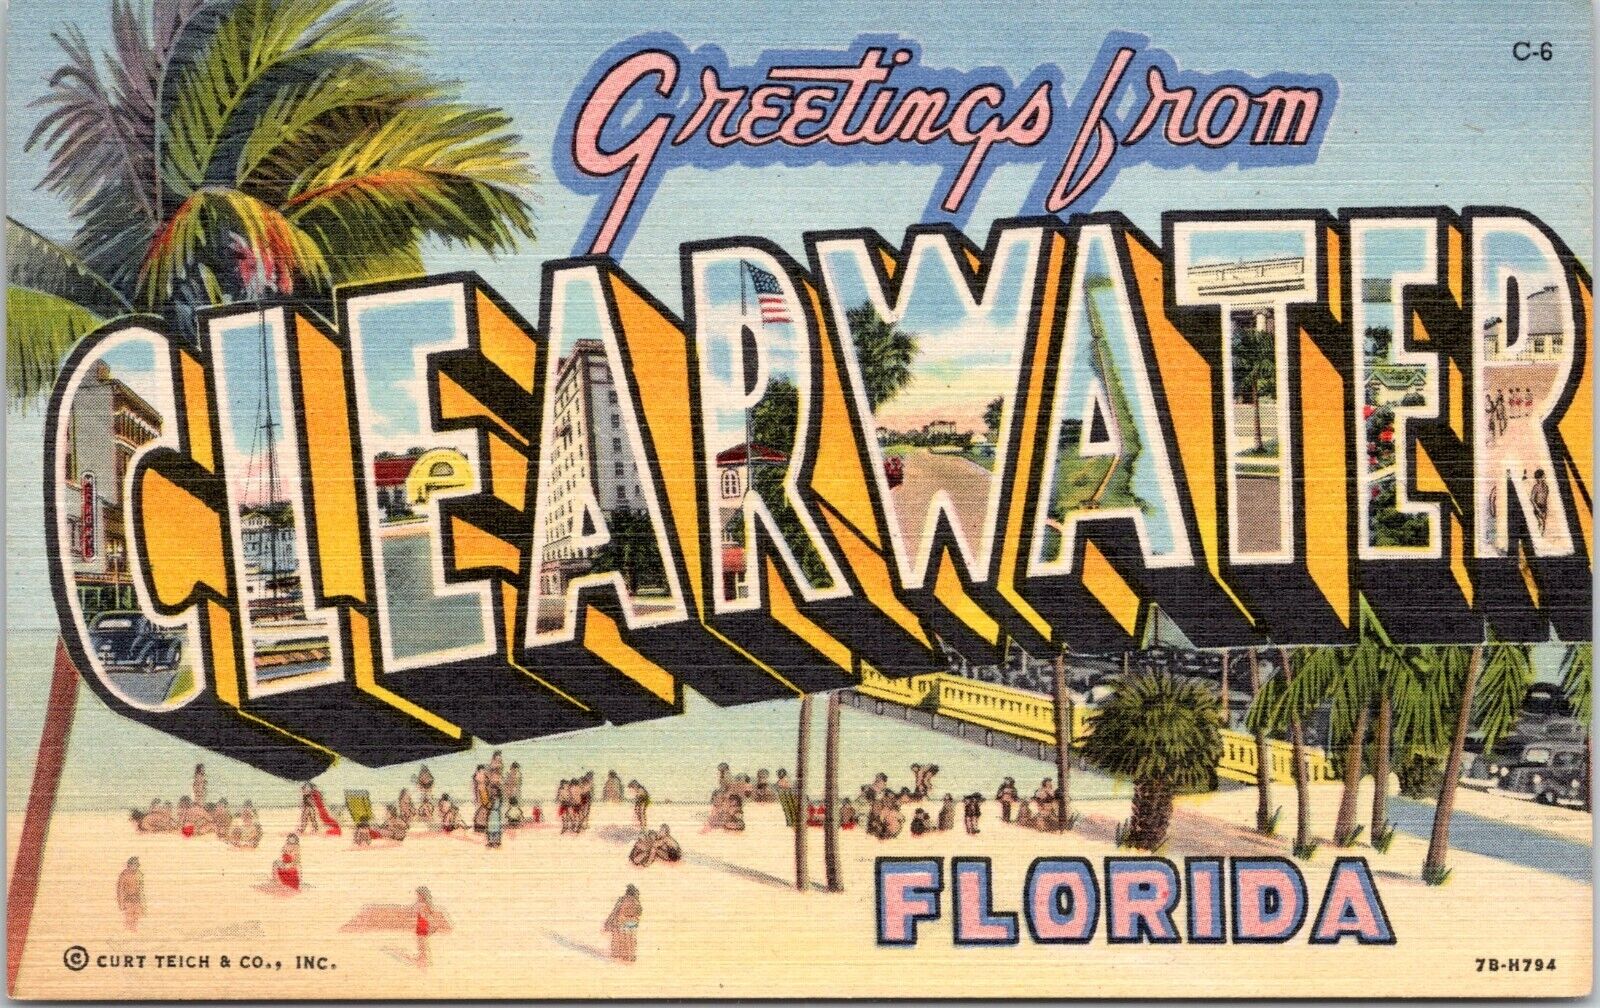 Large Letter Greetings, Clearwater, Florida - 1947 Linen Postcard